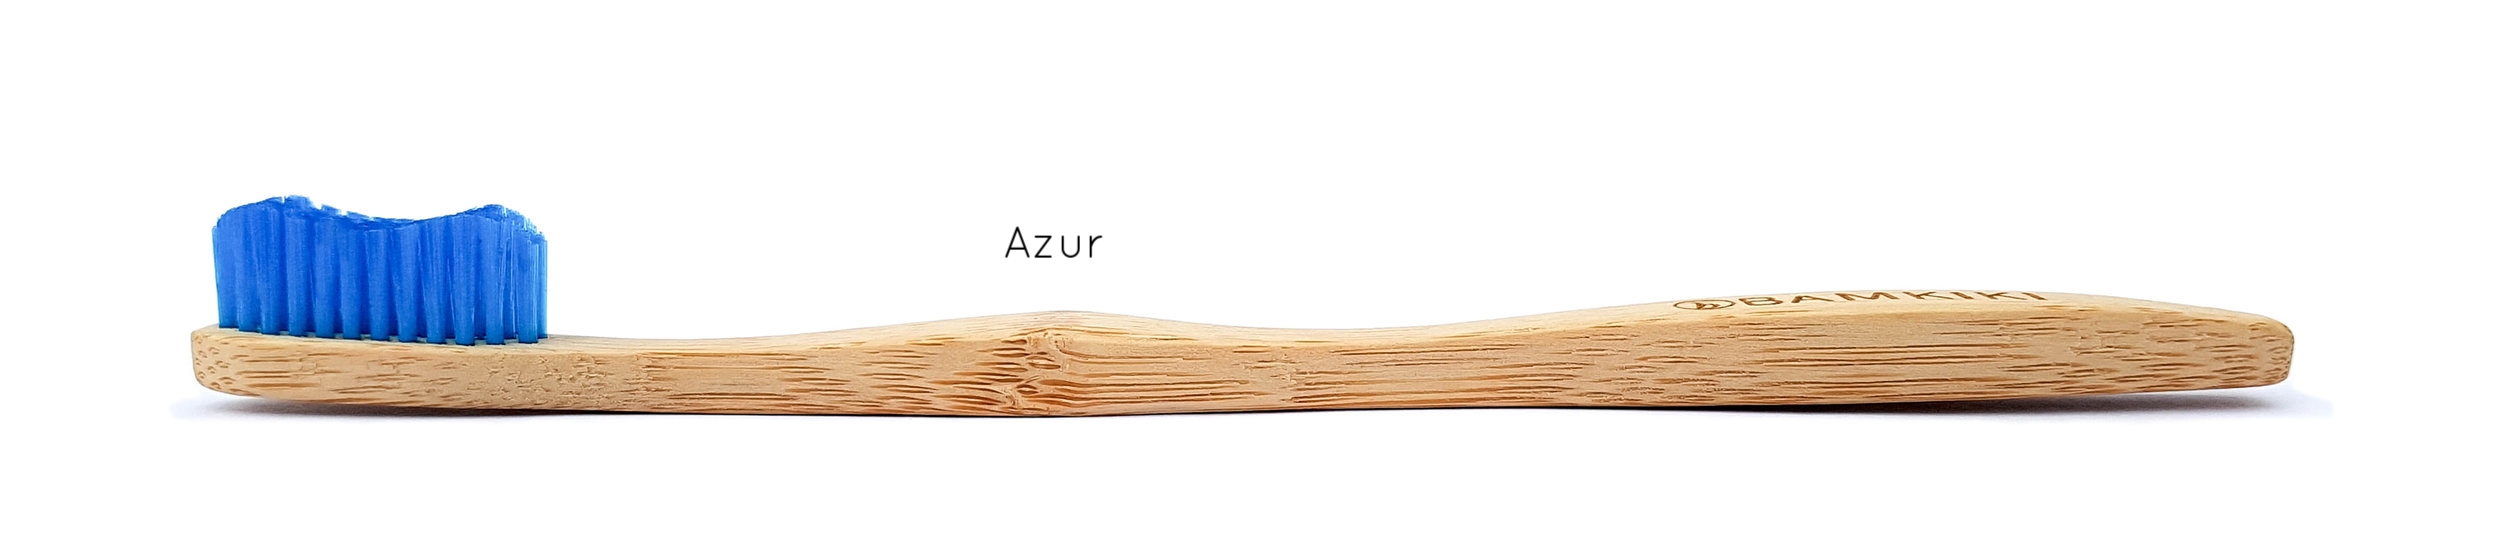 Australia environmentally friendly and biodegradable adult size bamboo toothbrush Azur.